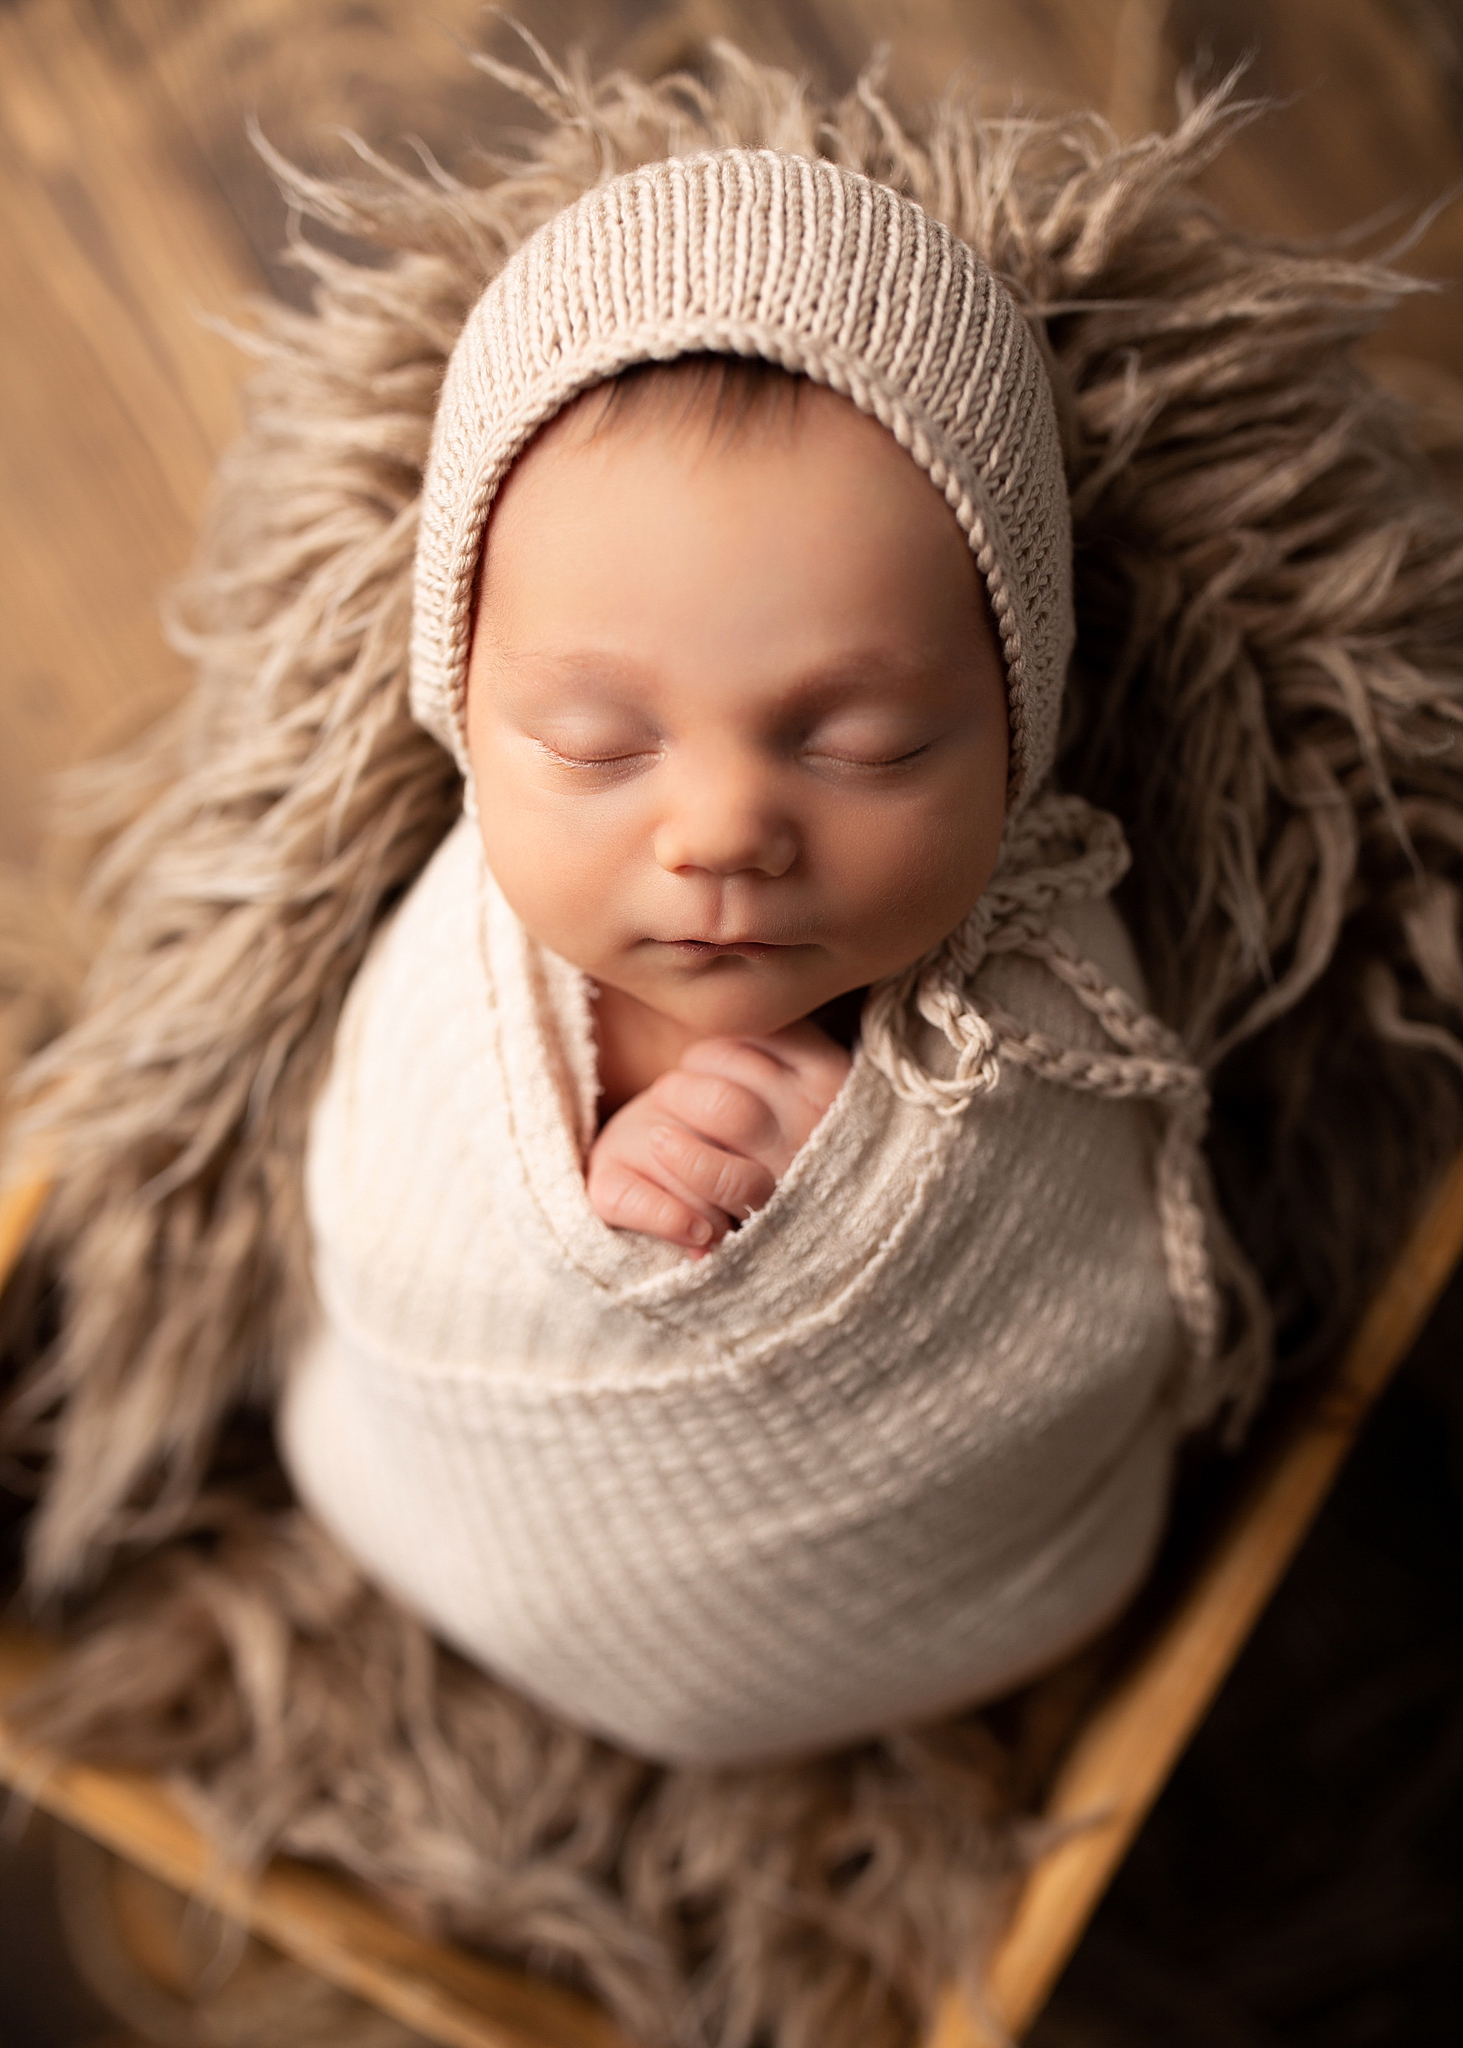 A newborn baby boy is photographed in a neutral beige coloured wrap and bonnet with wood flooring.